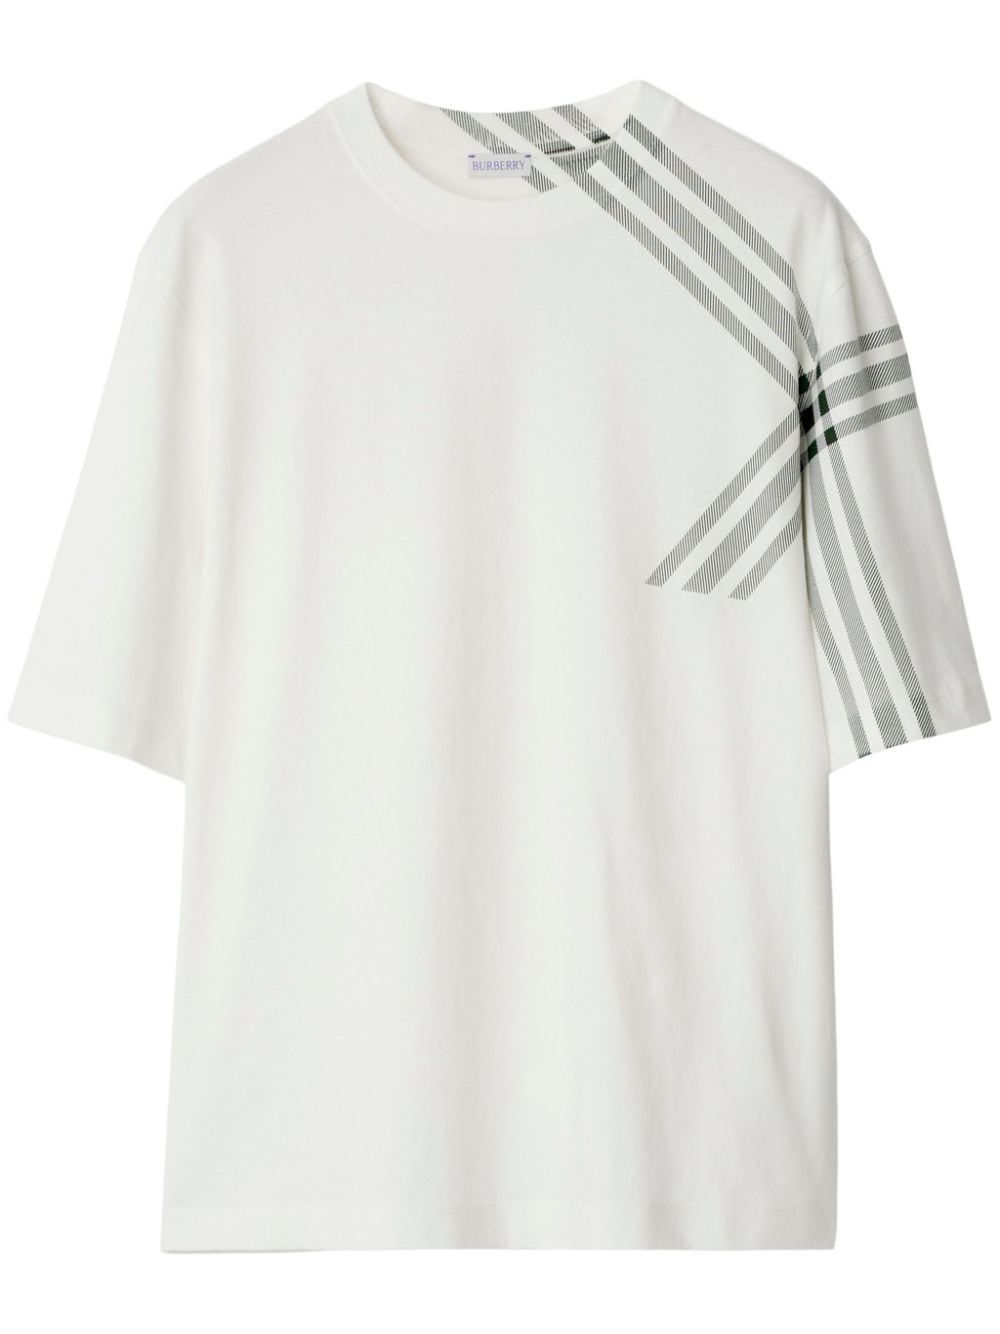 Burberry Check Sleeve Cotton T-shirt - White